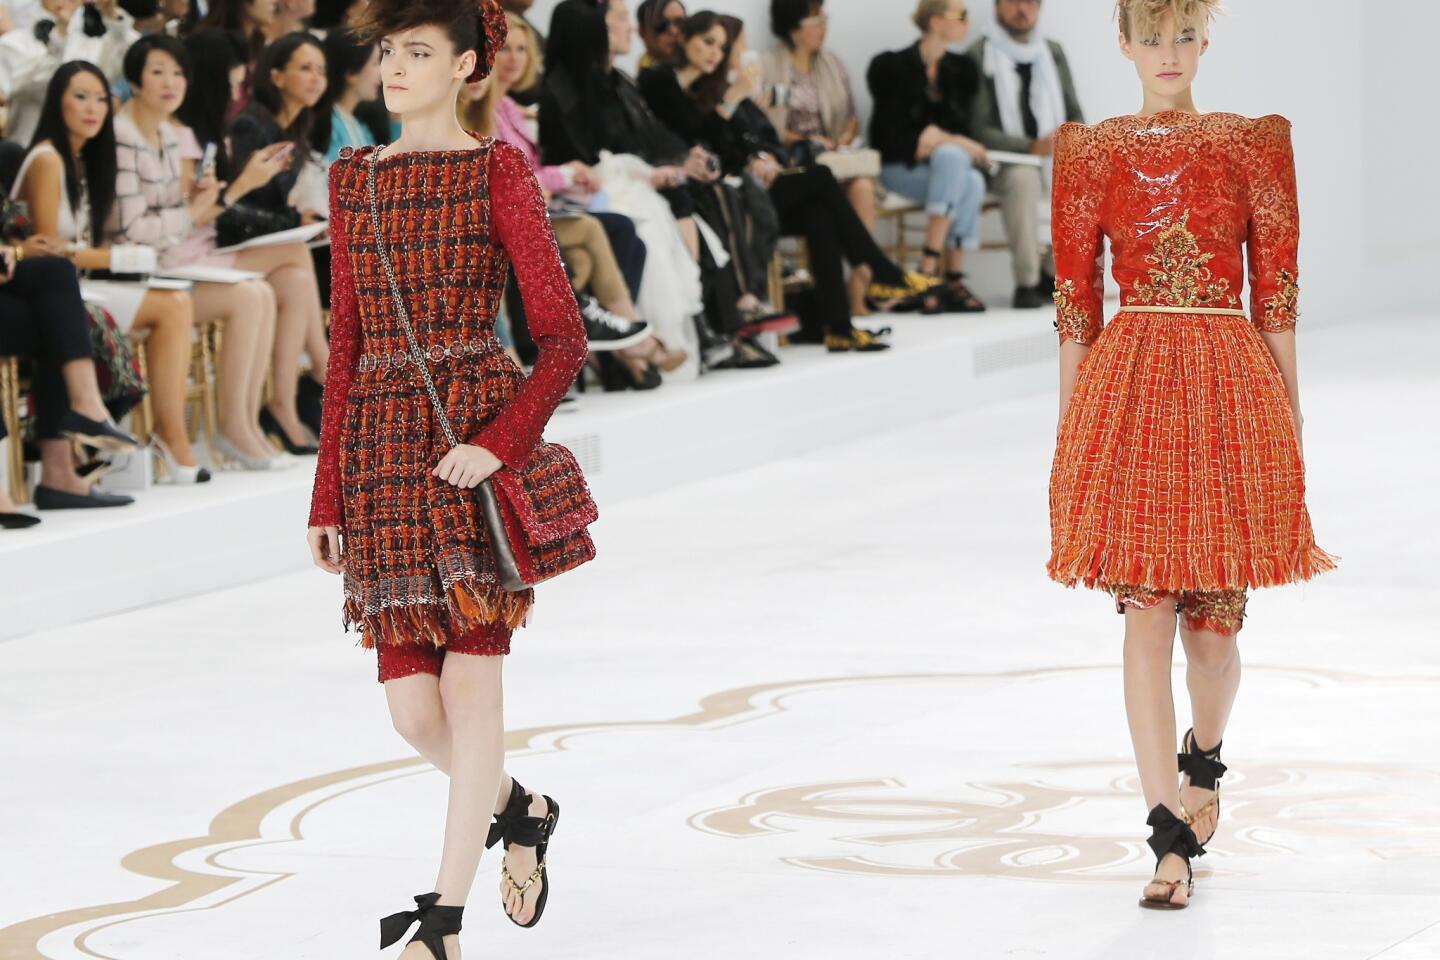 Chanel: Fall-Winter 2014/15 Haute Couture Collection reveal!